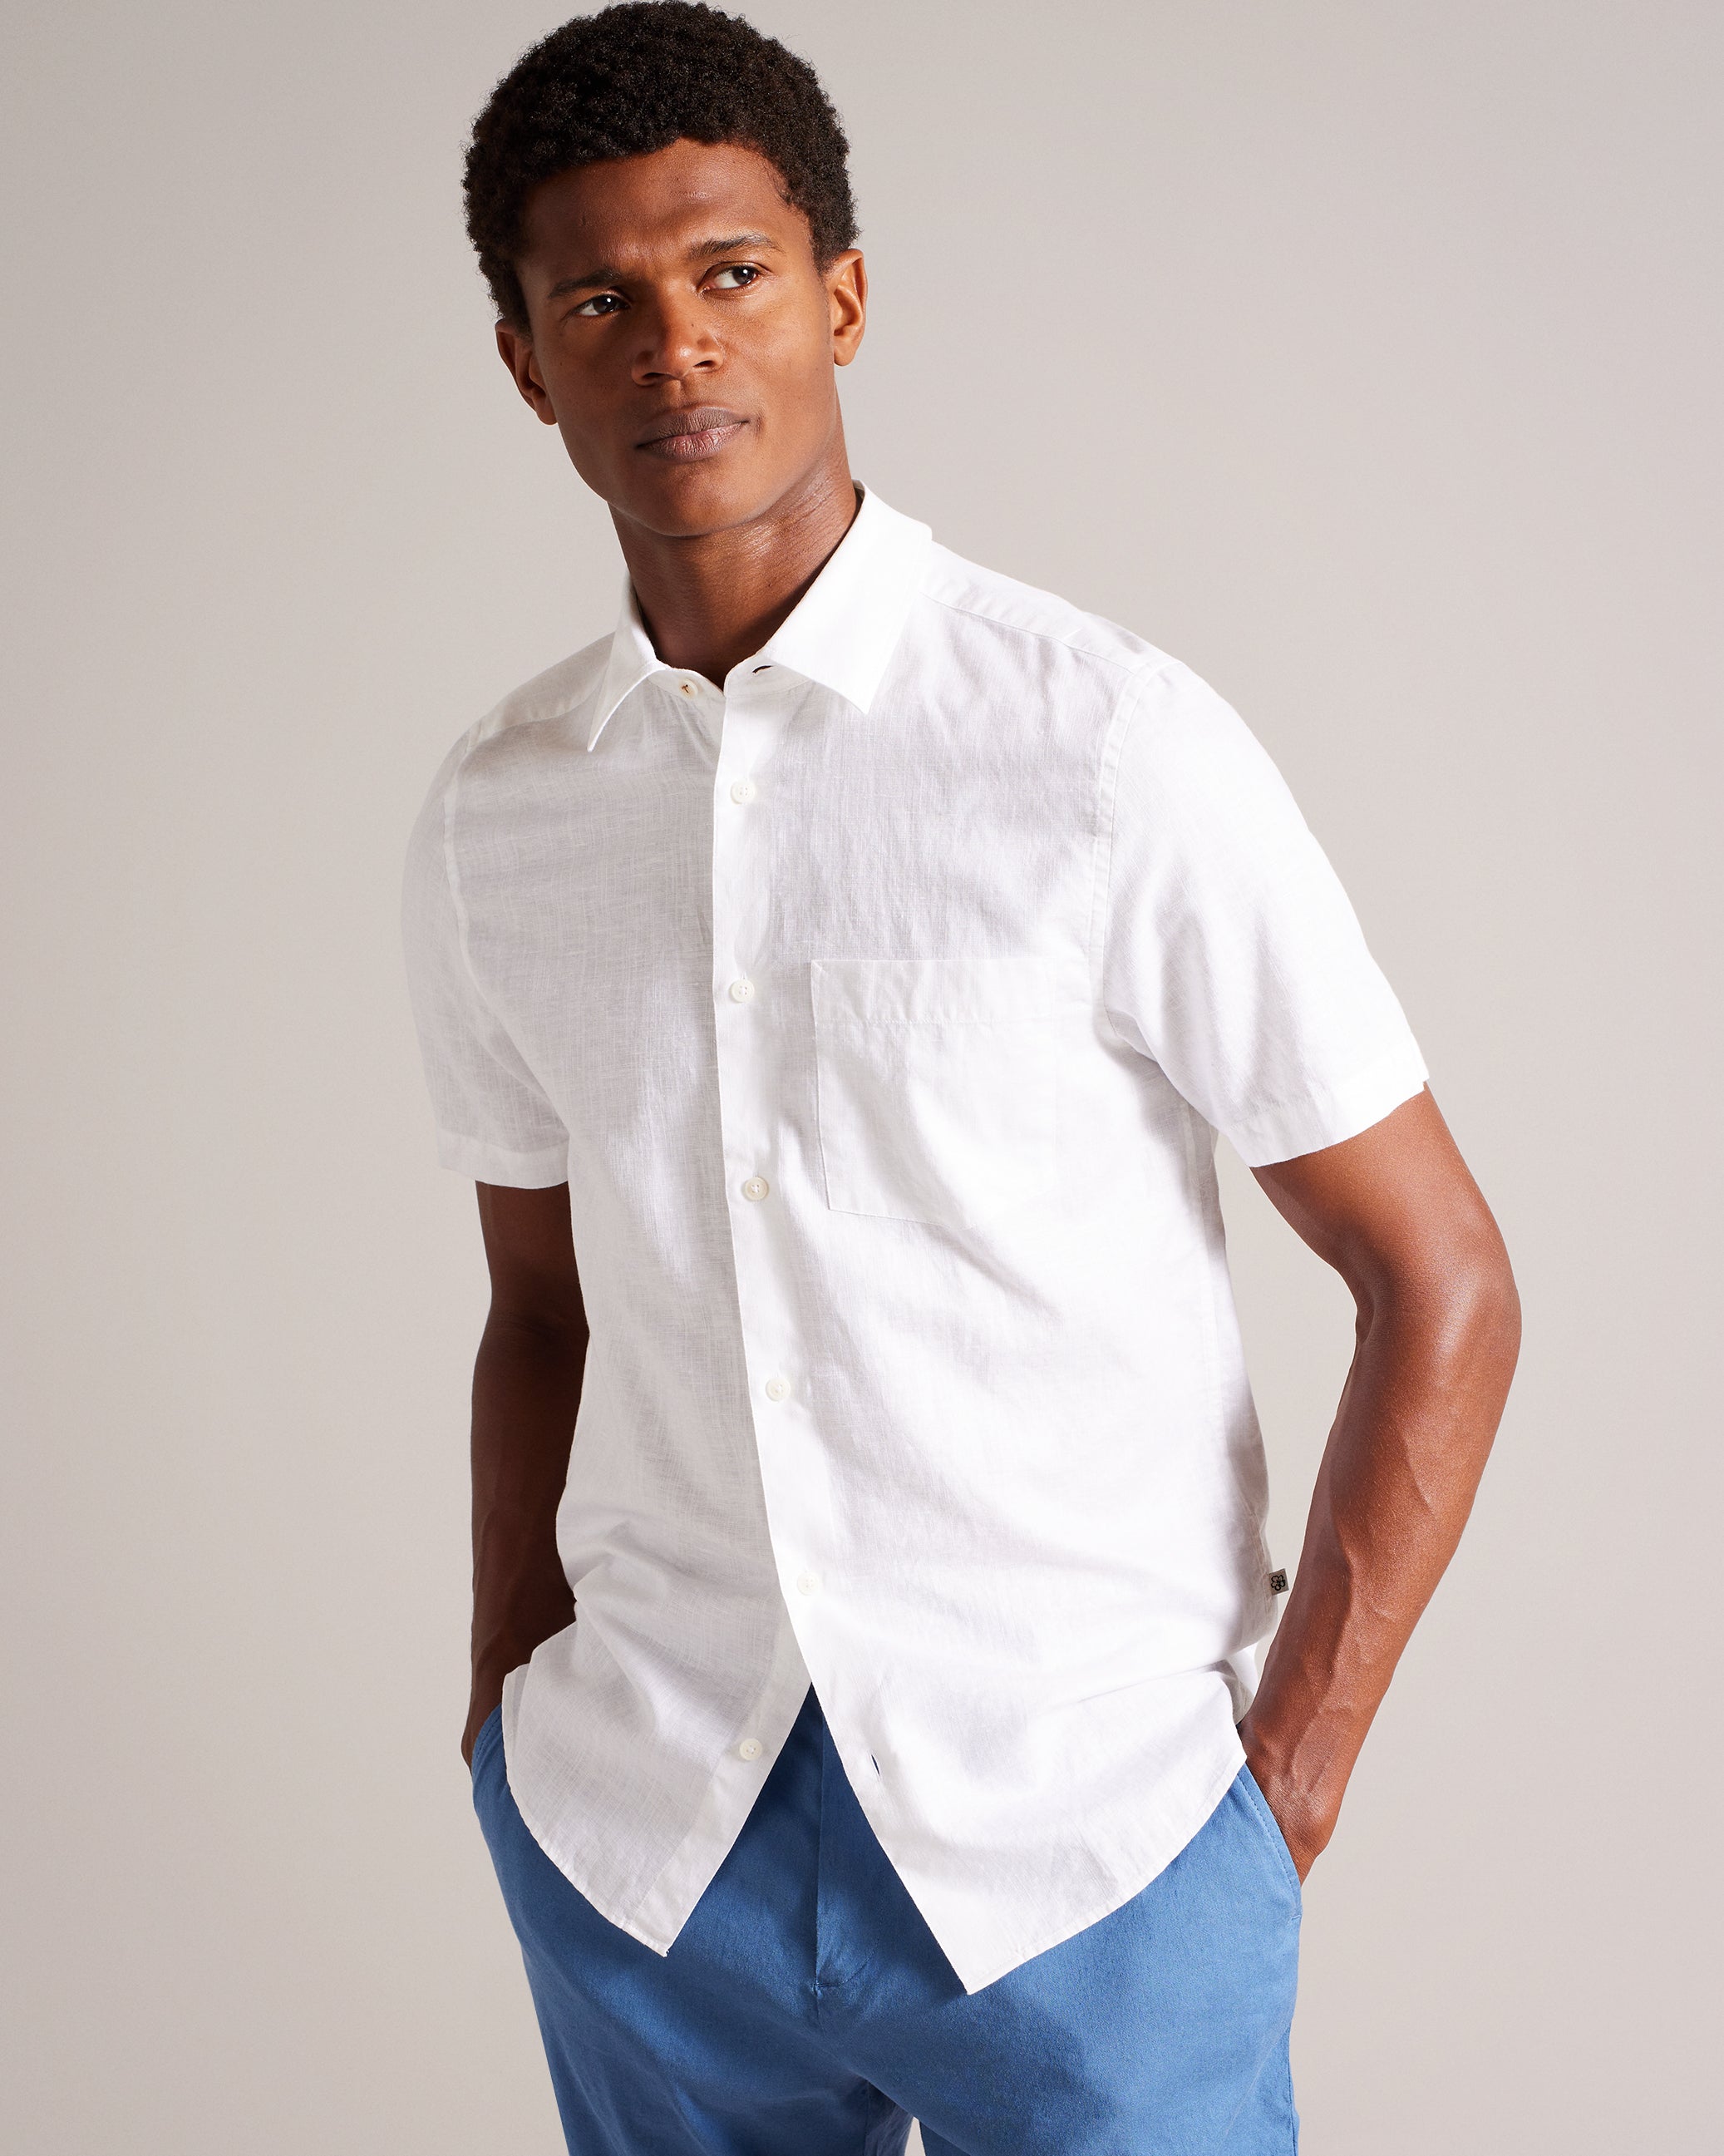 Men's Shirts – Ted Baker, Canada